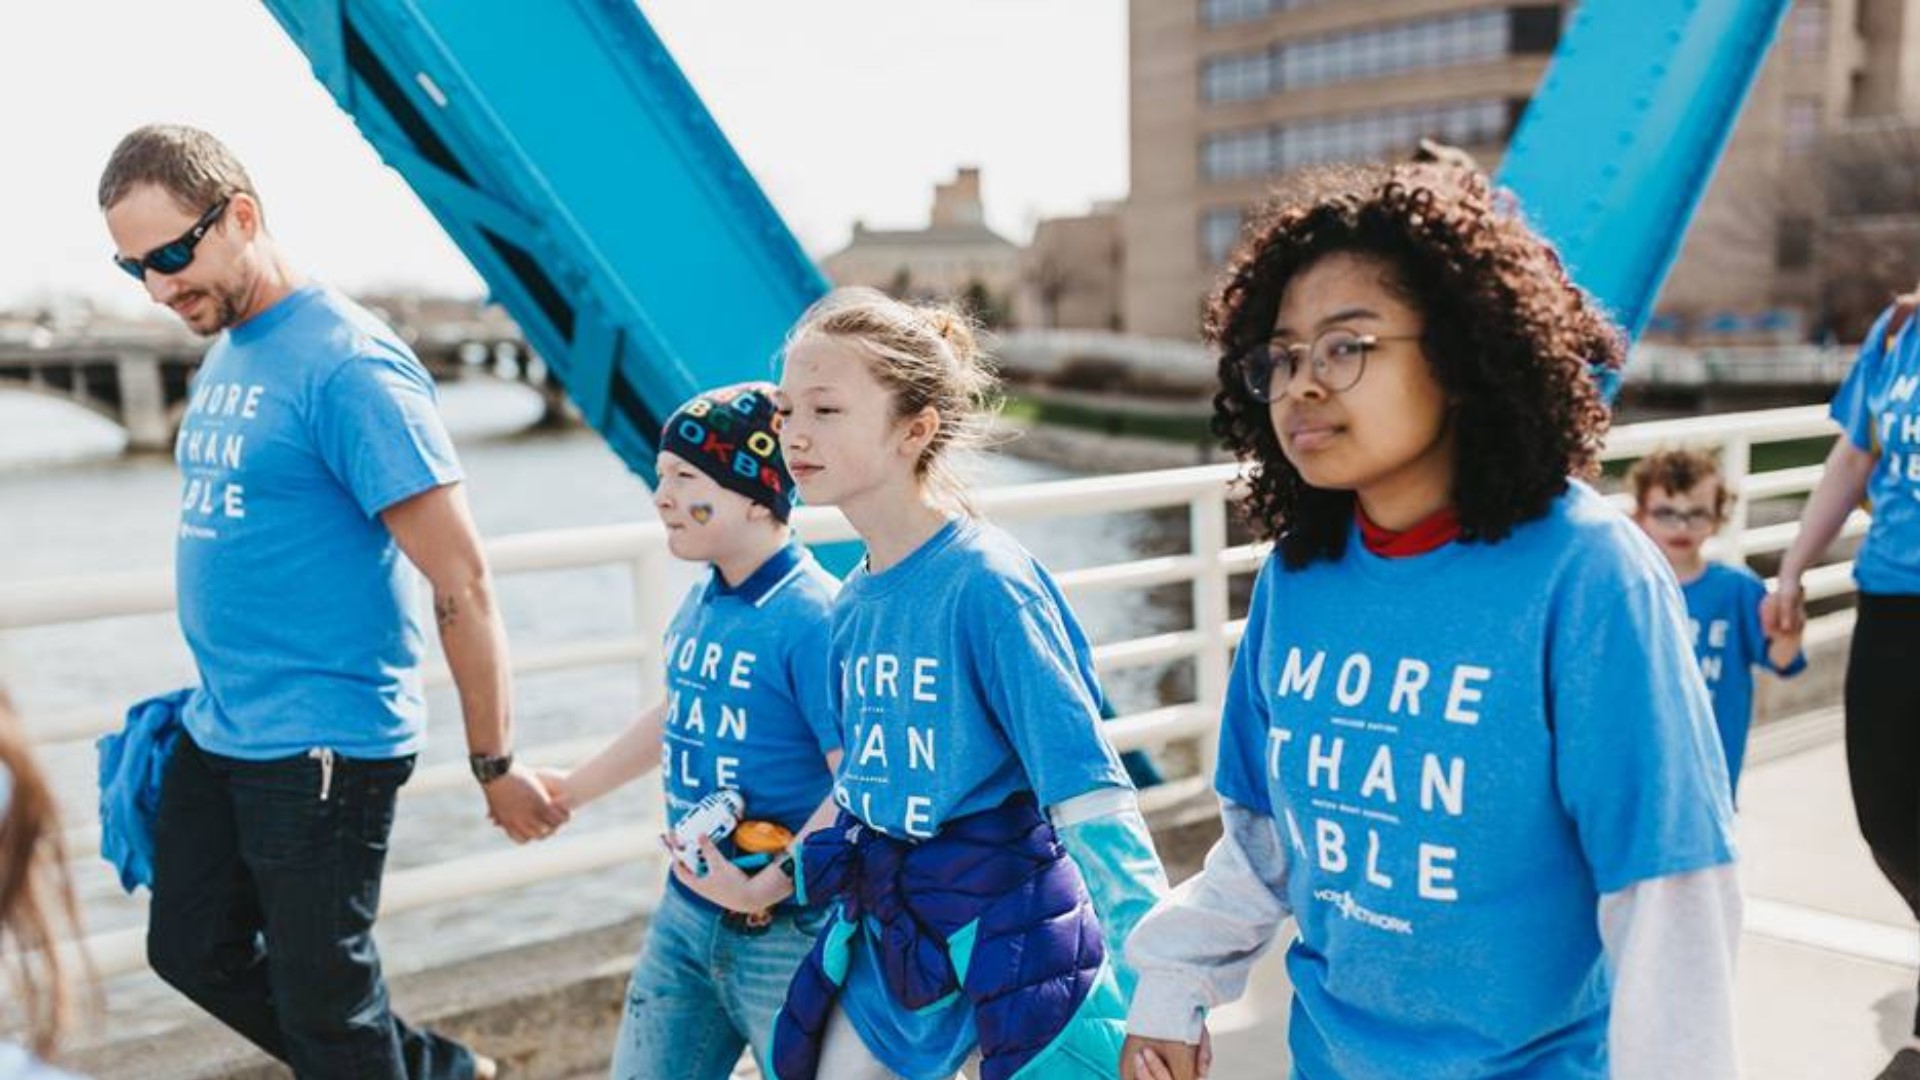 In recognition of Autism Awareness Month, Hope Network hosts the 5th Annual Bridge Walk for Autism in downtown Grand Rapids and the Grand Rapids Public Museum is putting on a sensory-friendly night.